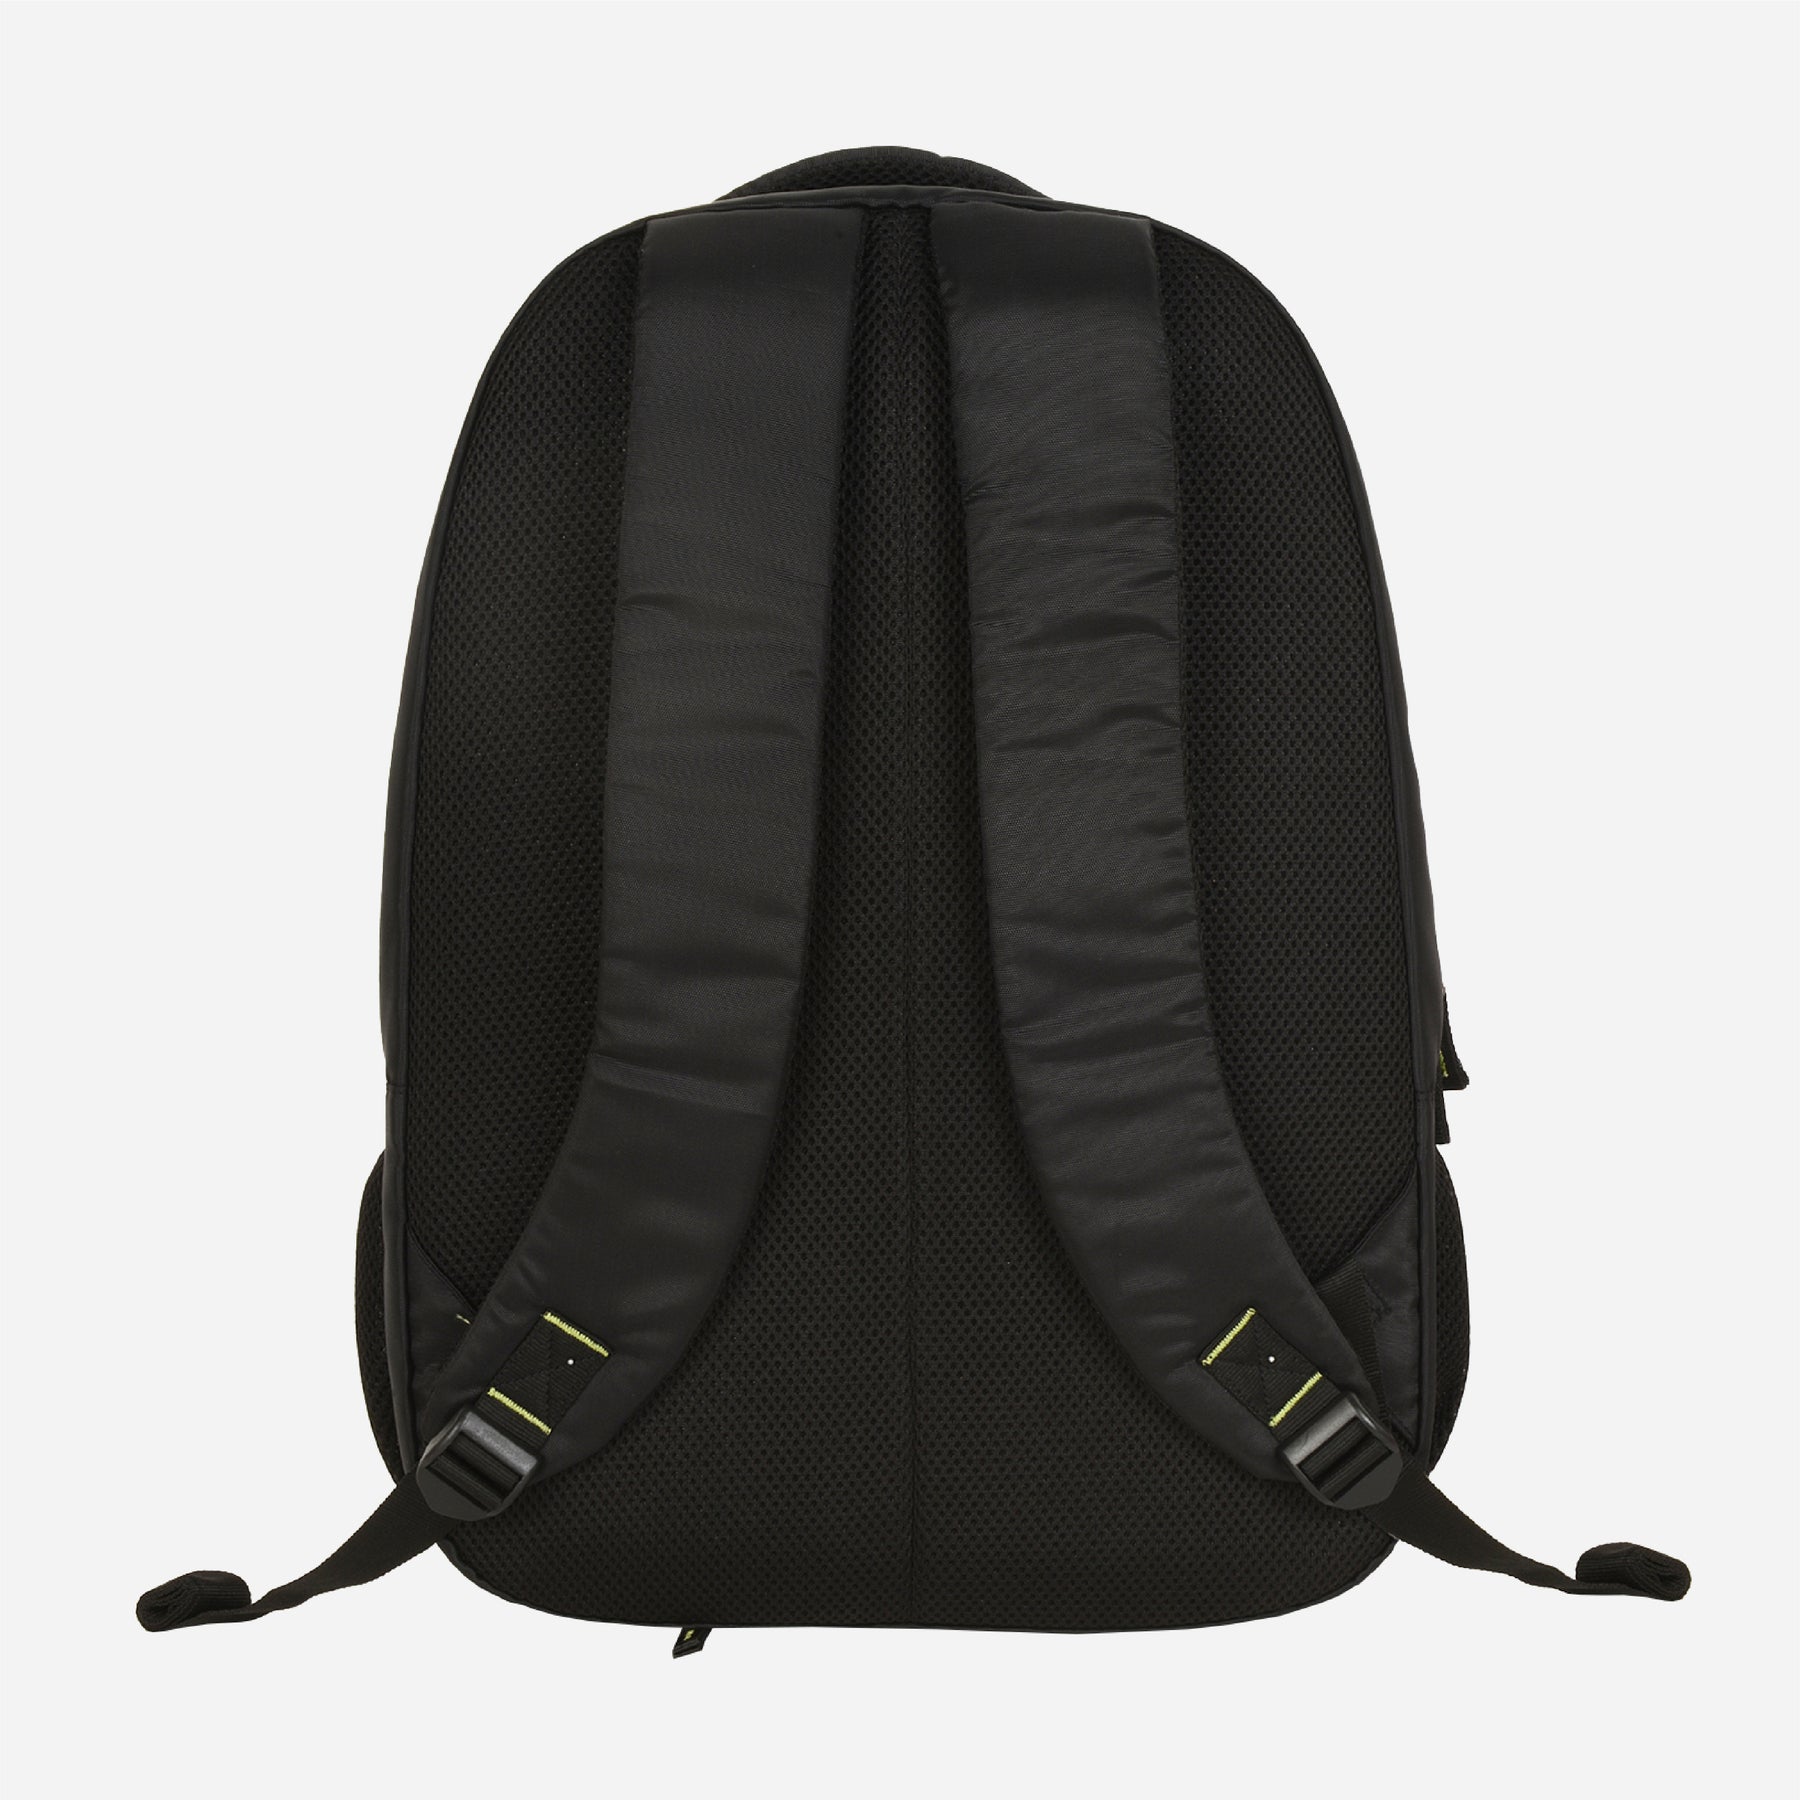 Helix Laptop Backpack with Raincover - Black